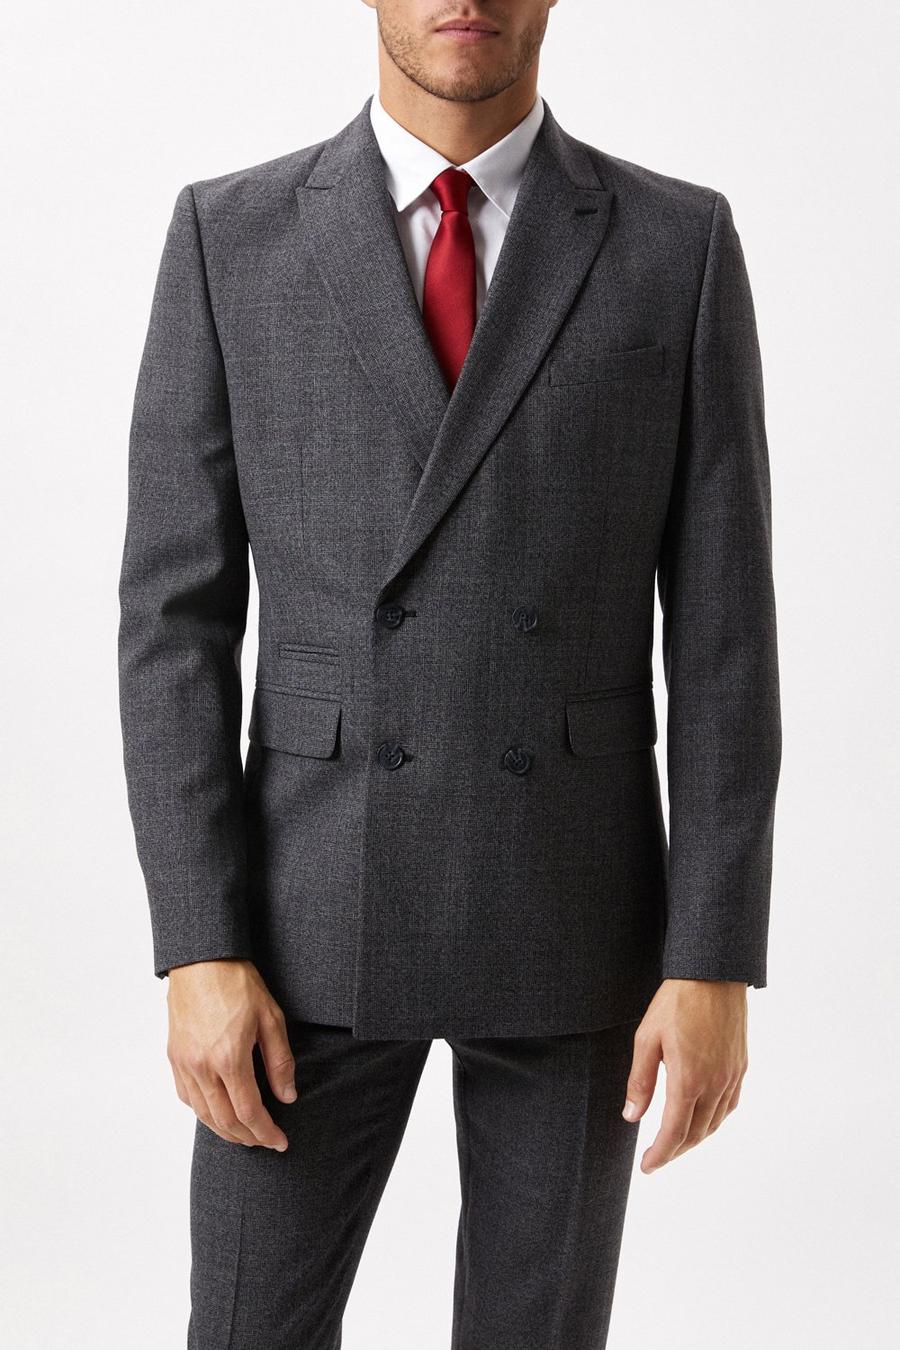 Slim Fit Double Breasted Grey Dogtooth British Wool Two - Piece Suit